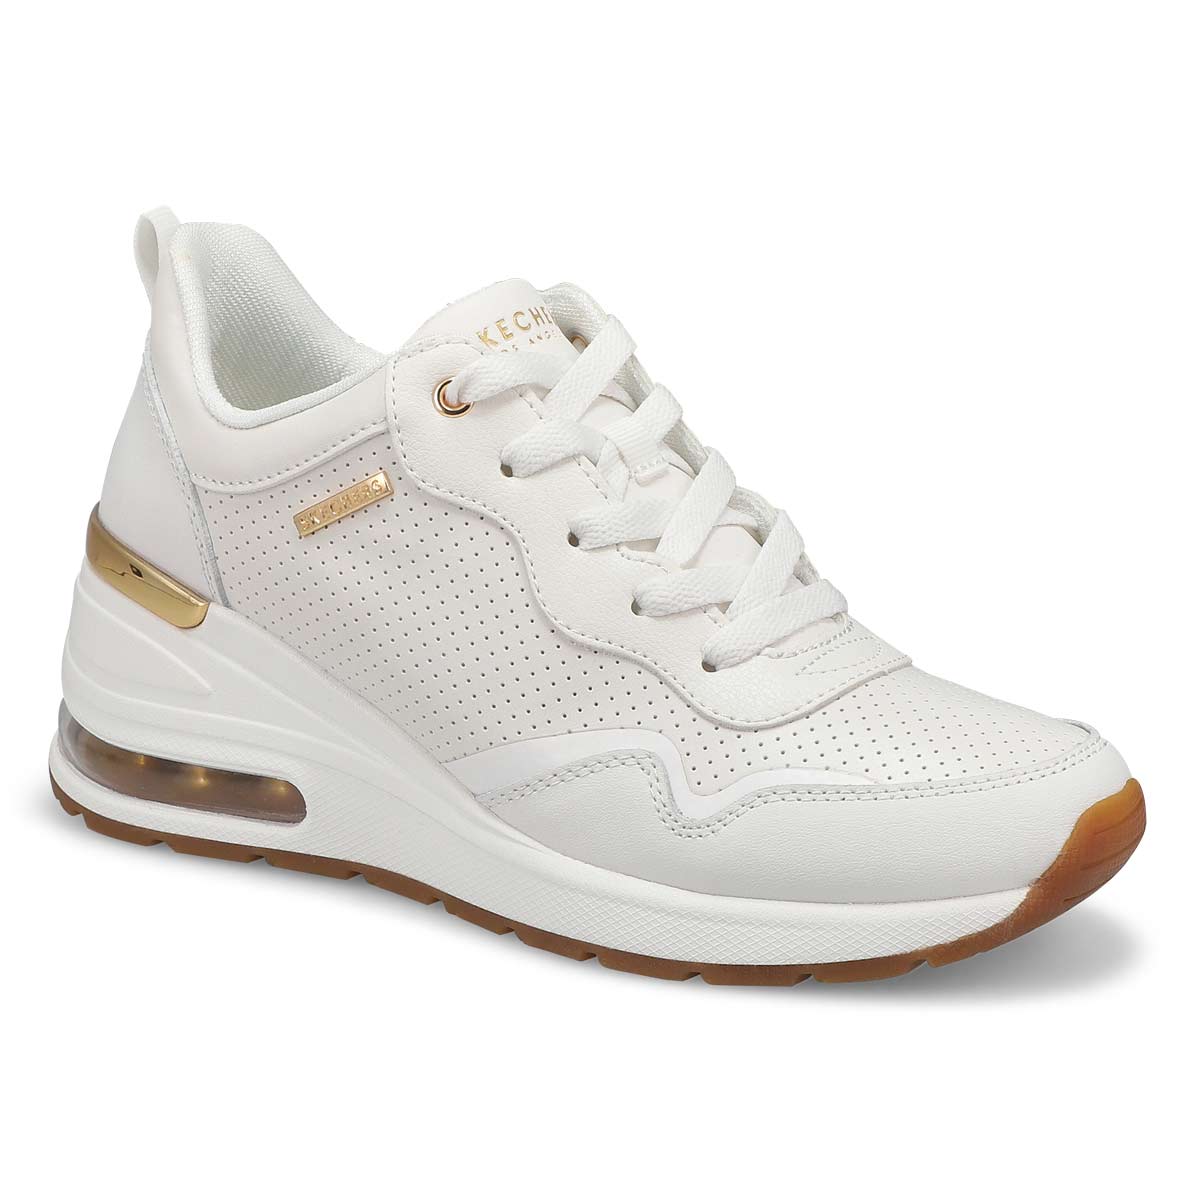 Womens Million Air Lace Up Sneaker - White